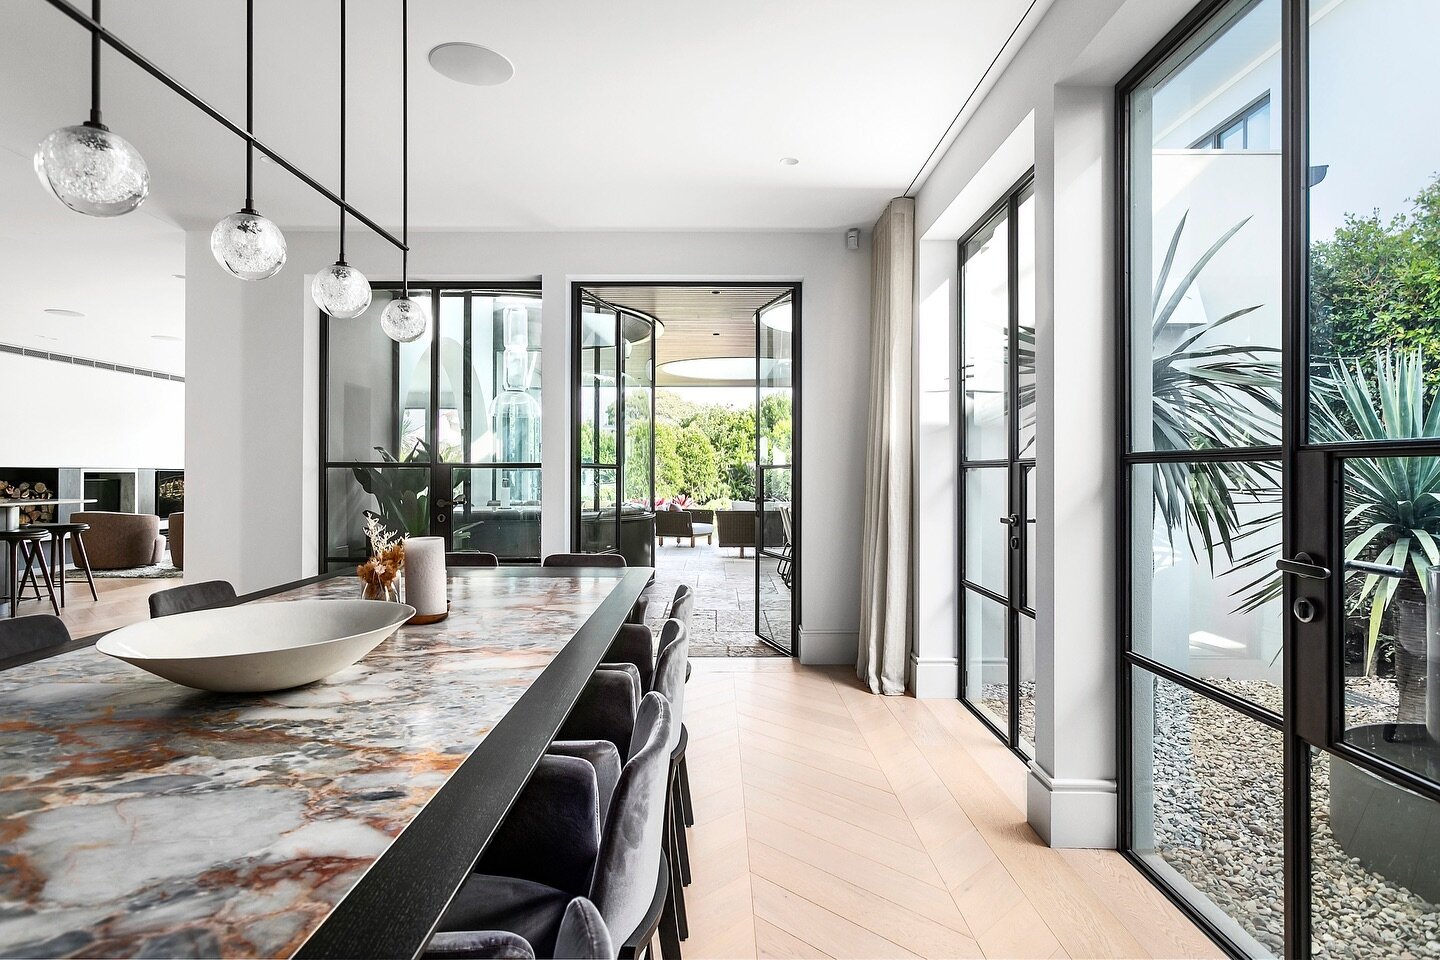 Create a statement on your next project with our steel doors designed for luxury living. Let&rsquo;s discuss all that can be accomplished when you use TITONI Windows! 

+ Cold formed and sharp-edged 1/16&rdquo;
thick galvanized steel profiles &ndash